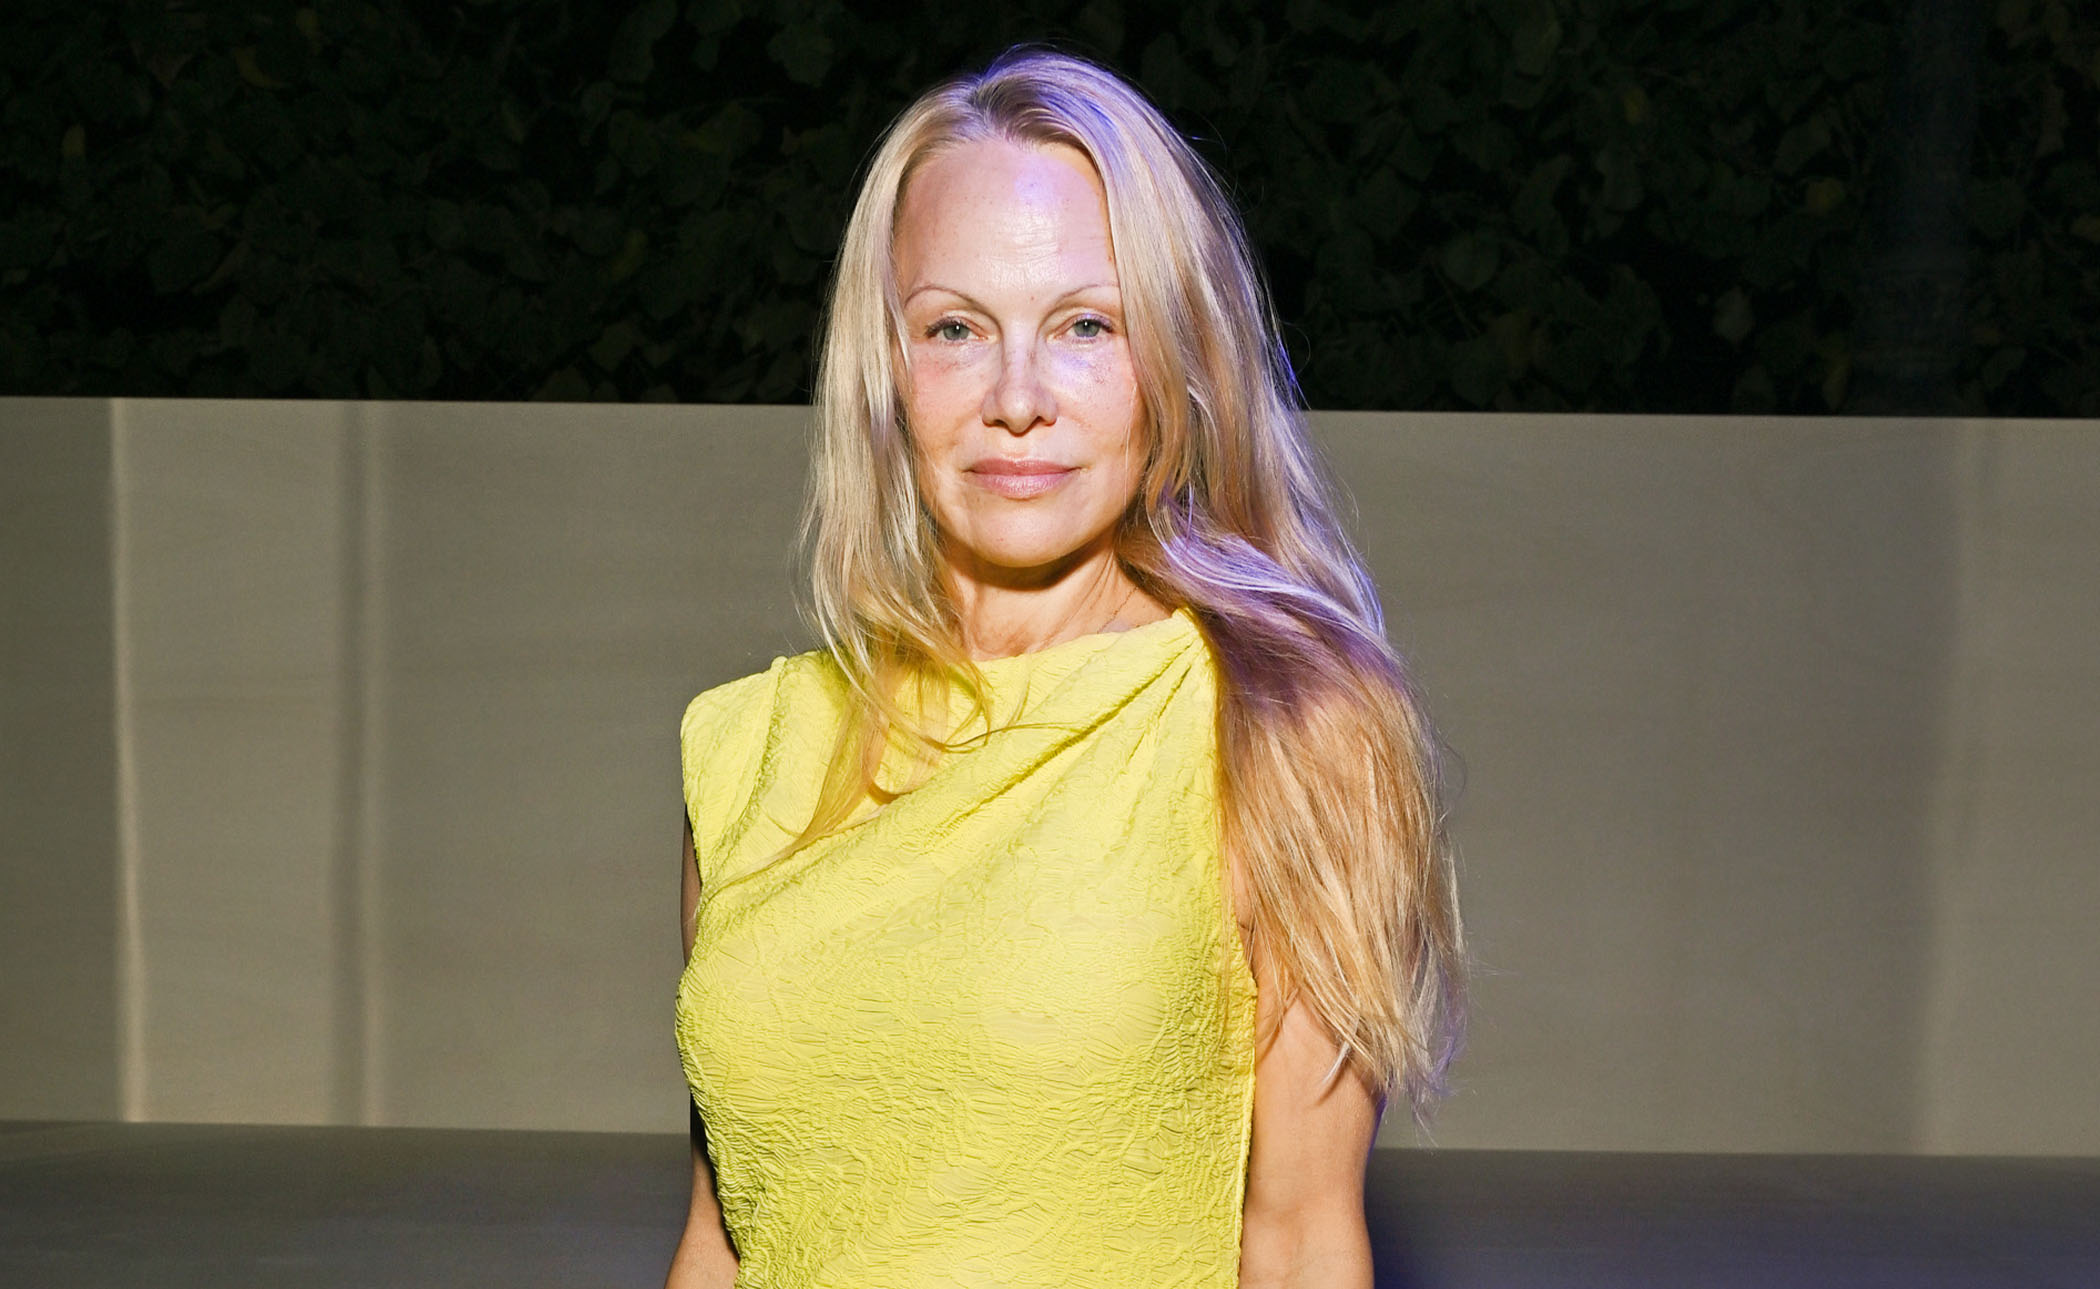 Inside Pamela Anderson's body and face transformation: see the